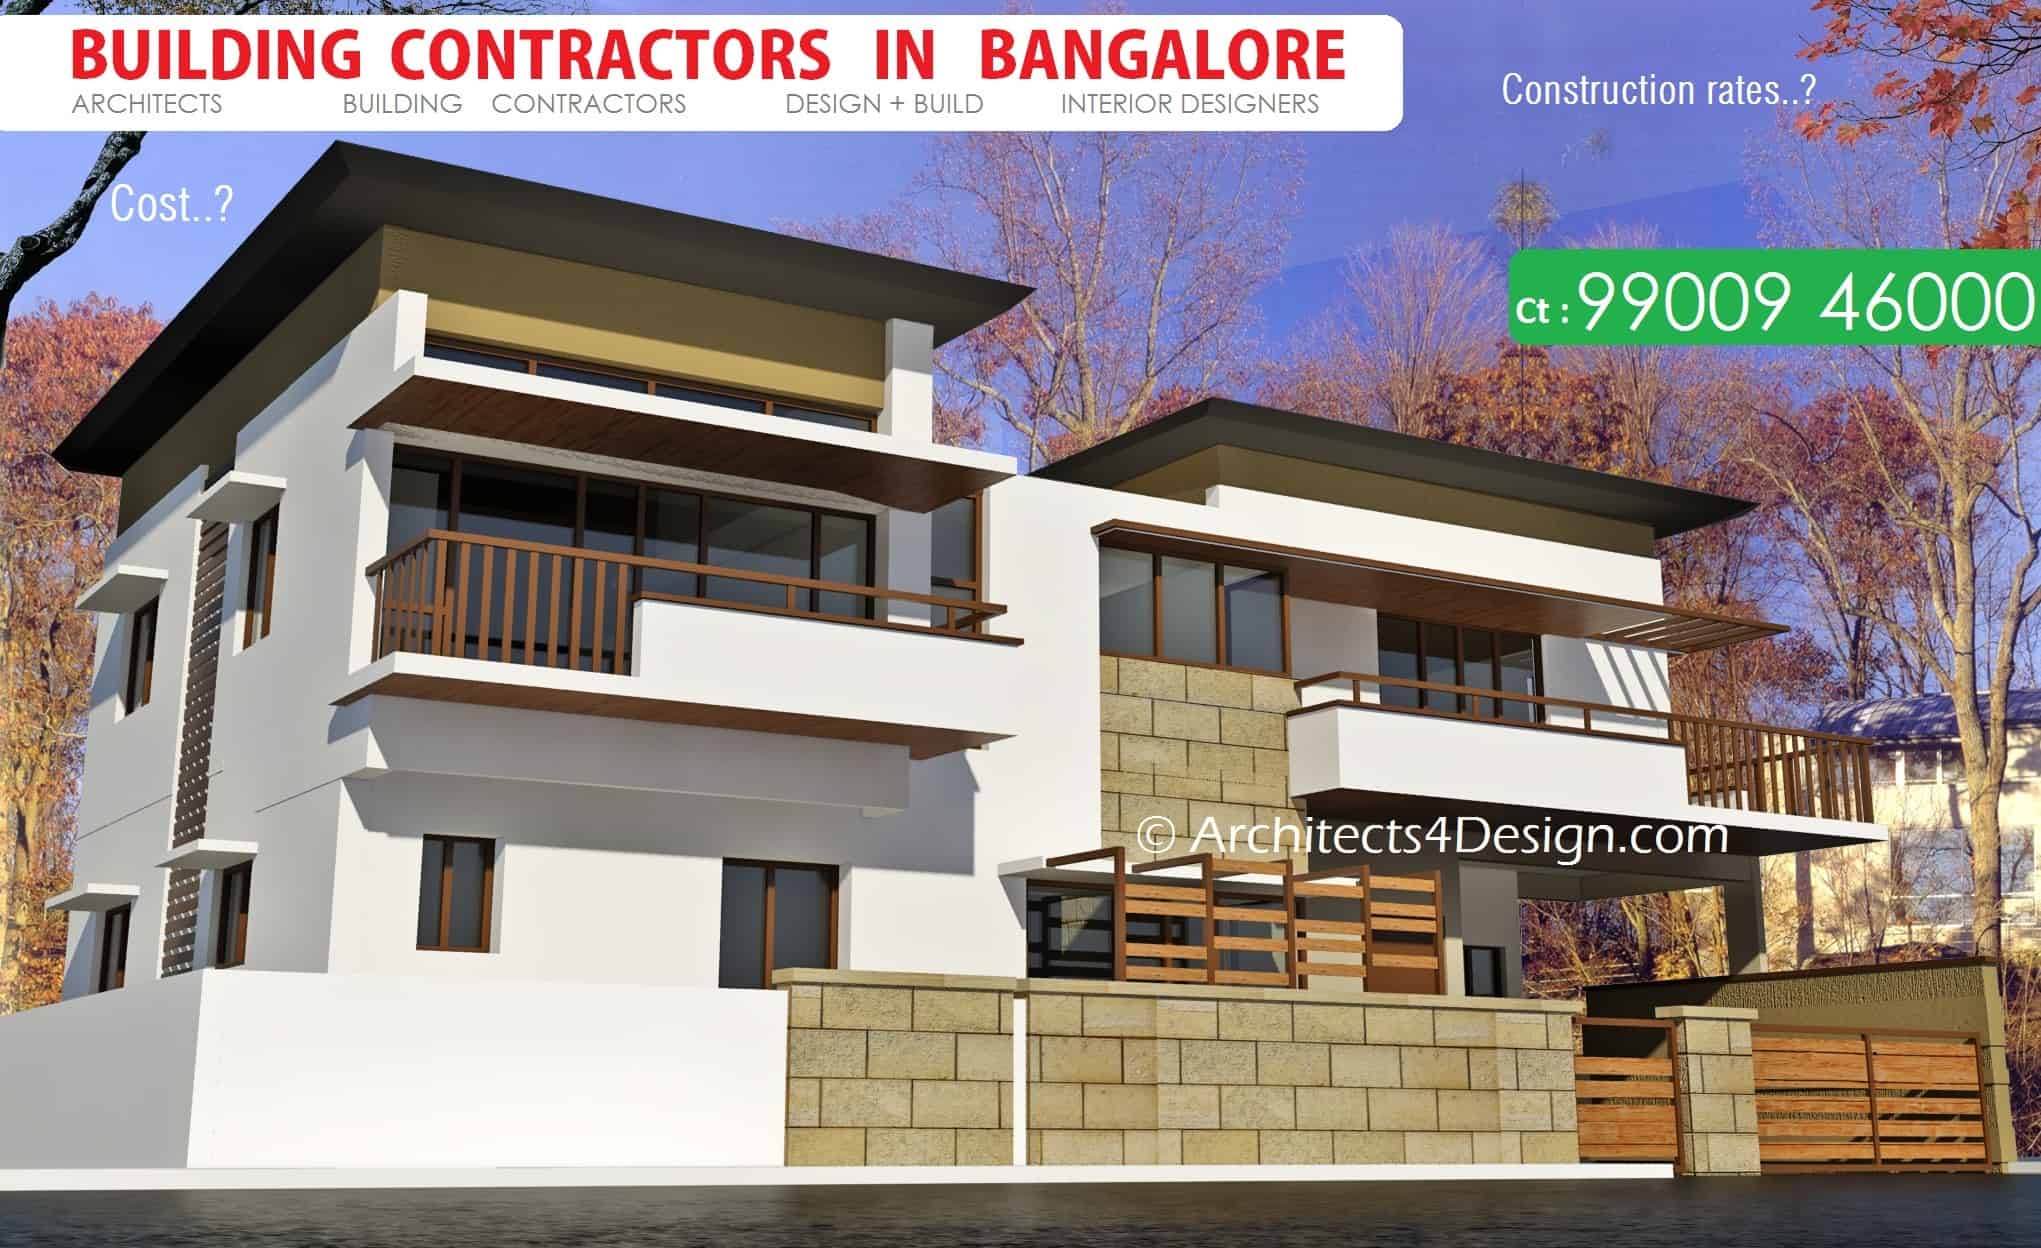 BUILDING CONTRACTORS In Bangalore Know Current Construction Rates